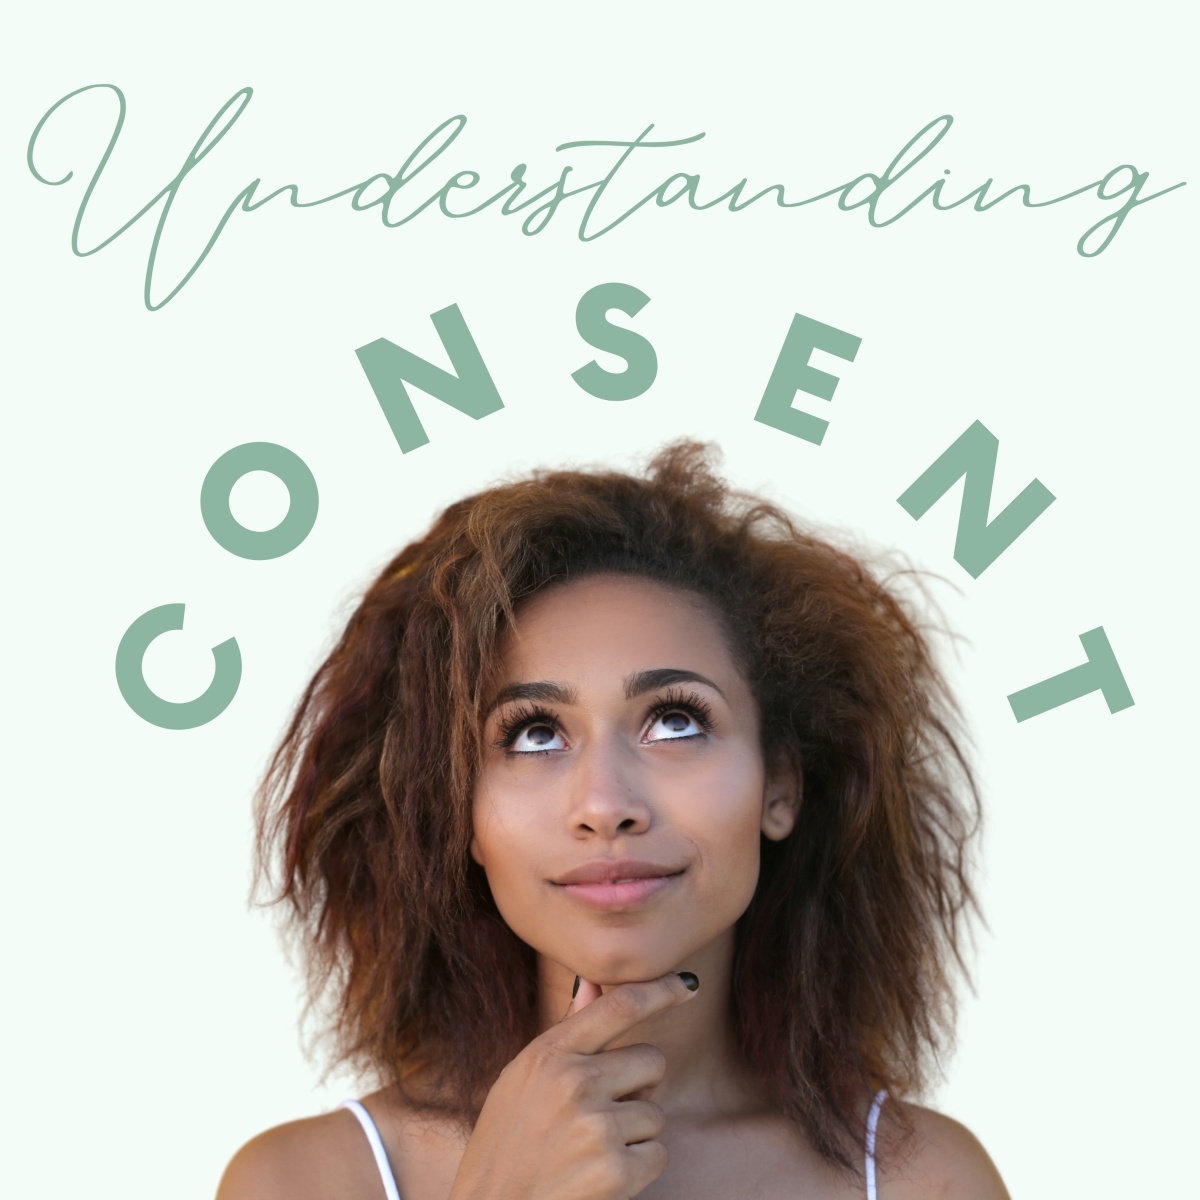 A Philosophical Analysis to Better Understand Consent